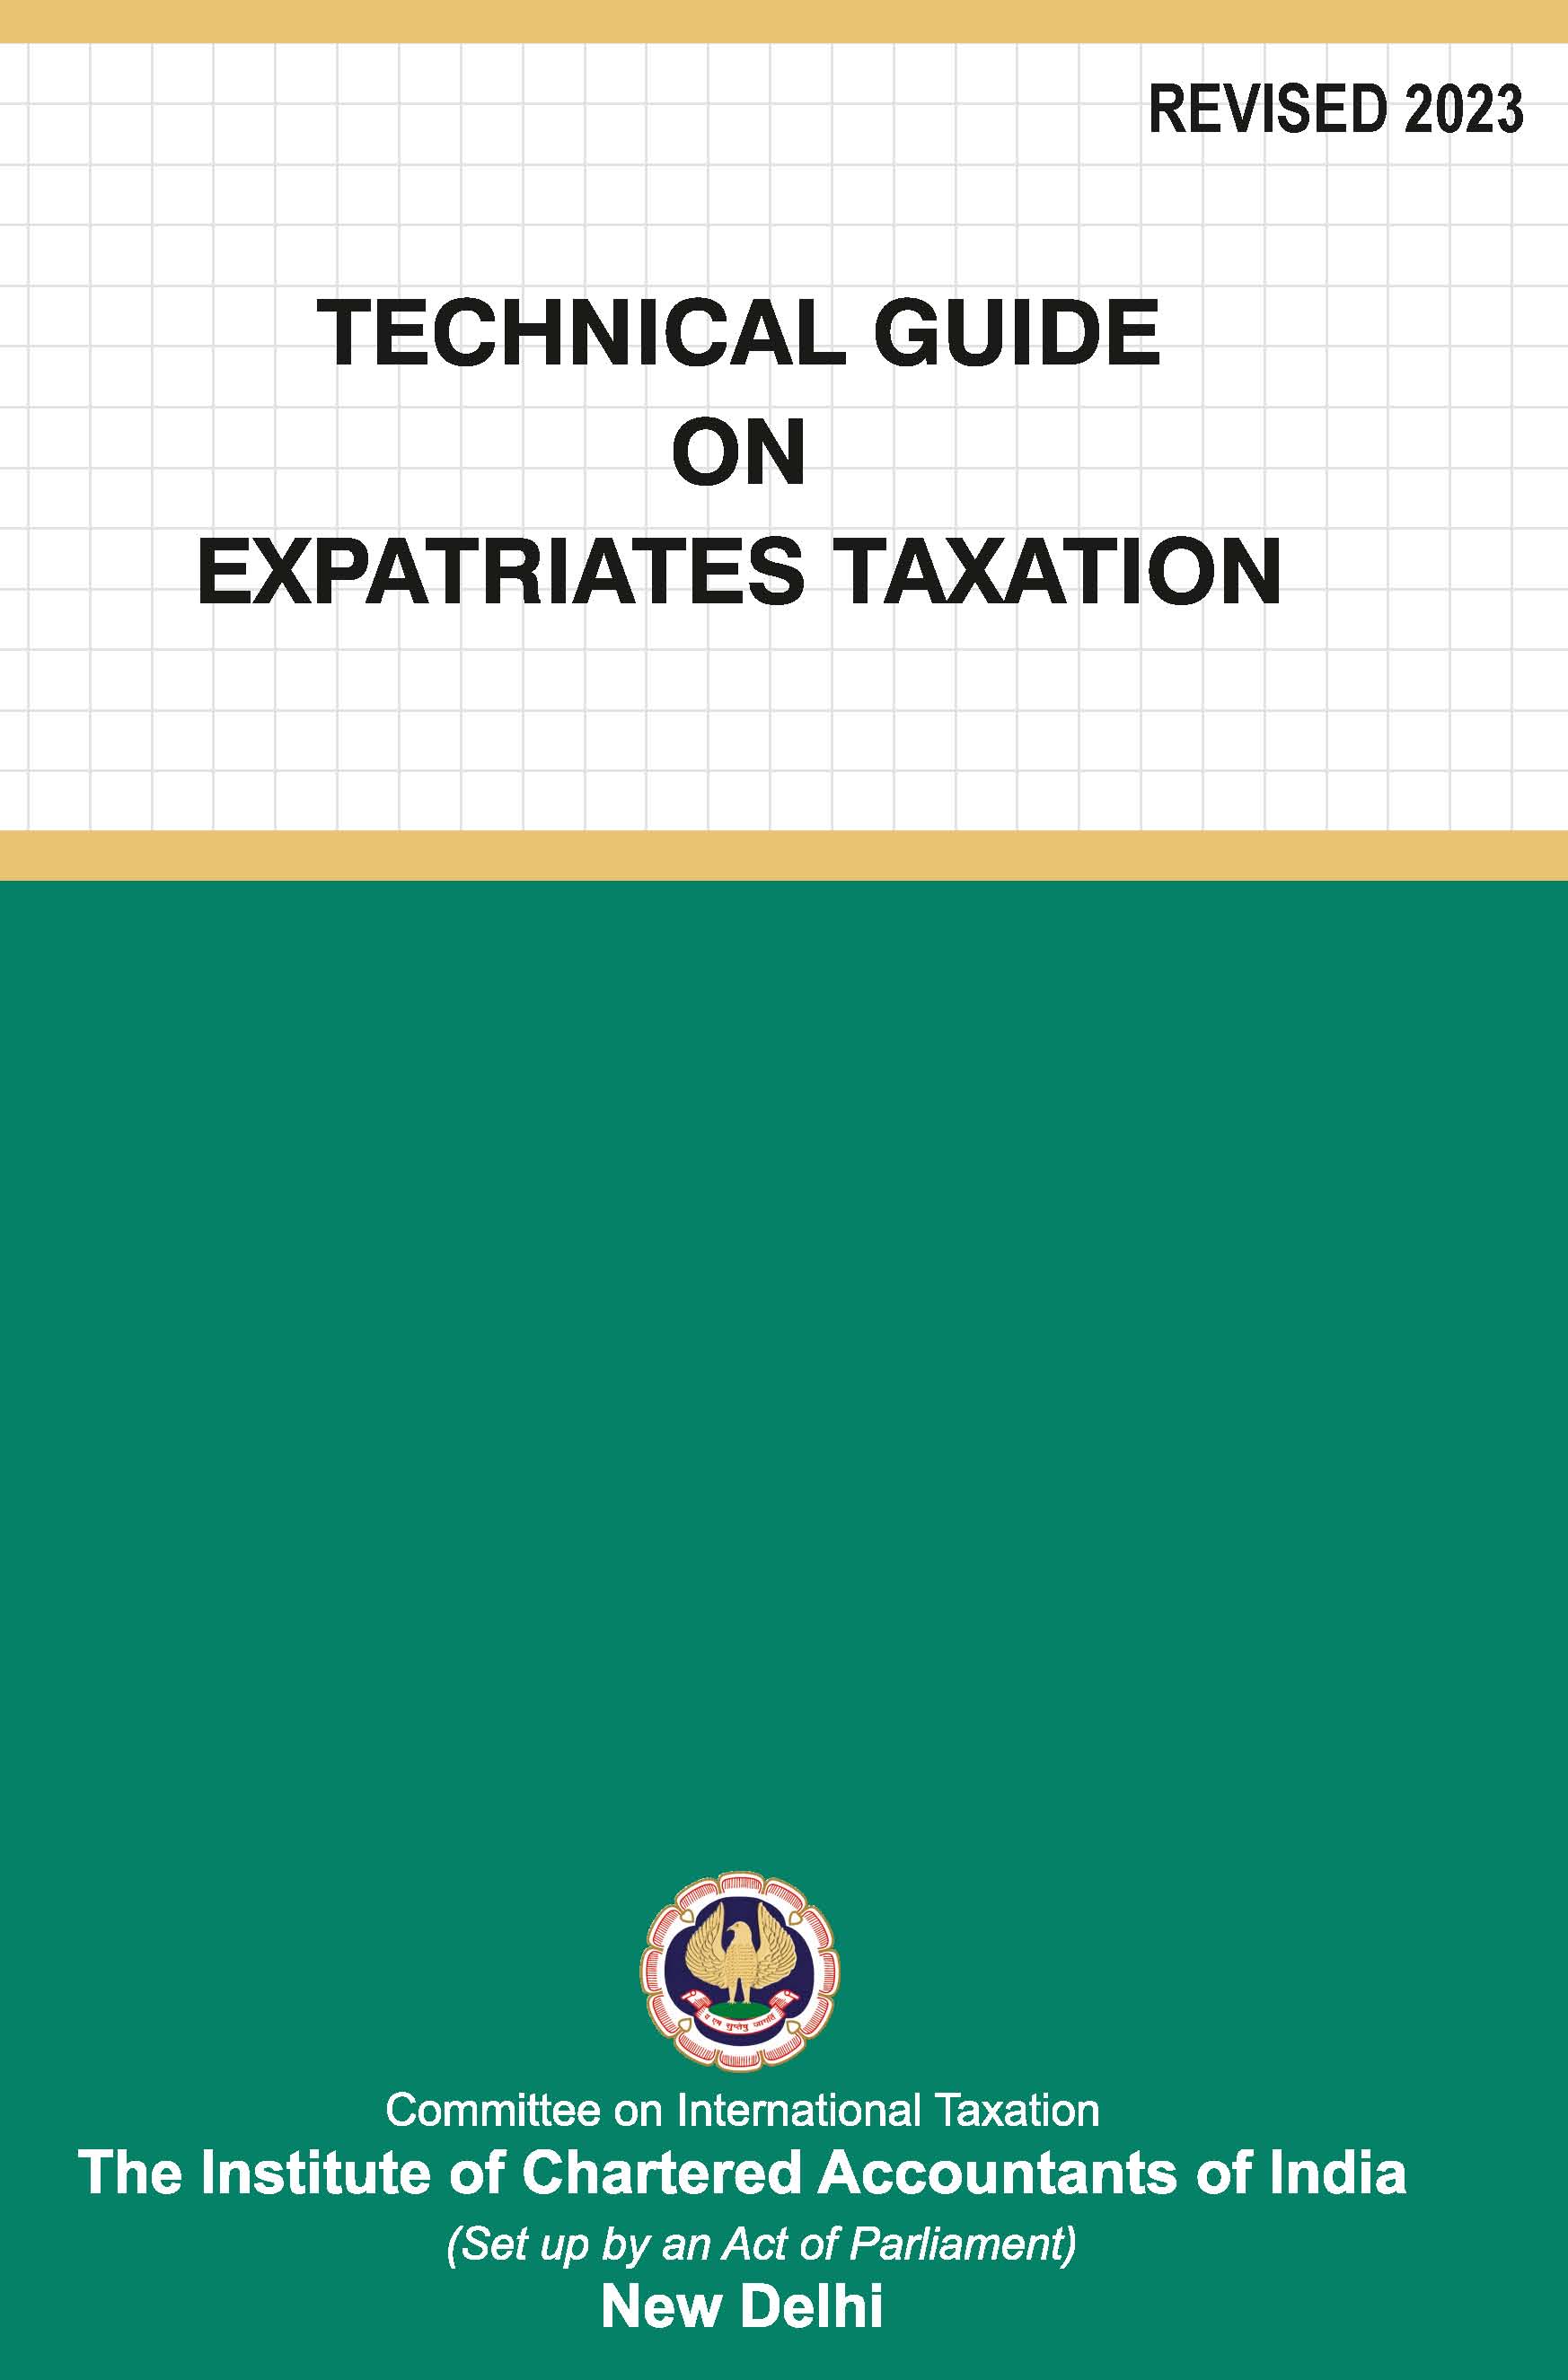 Technical Guide on Expatriates Taxation - Revised 2023 (February, 2023)